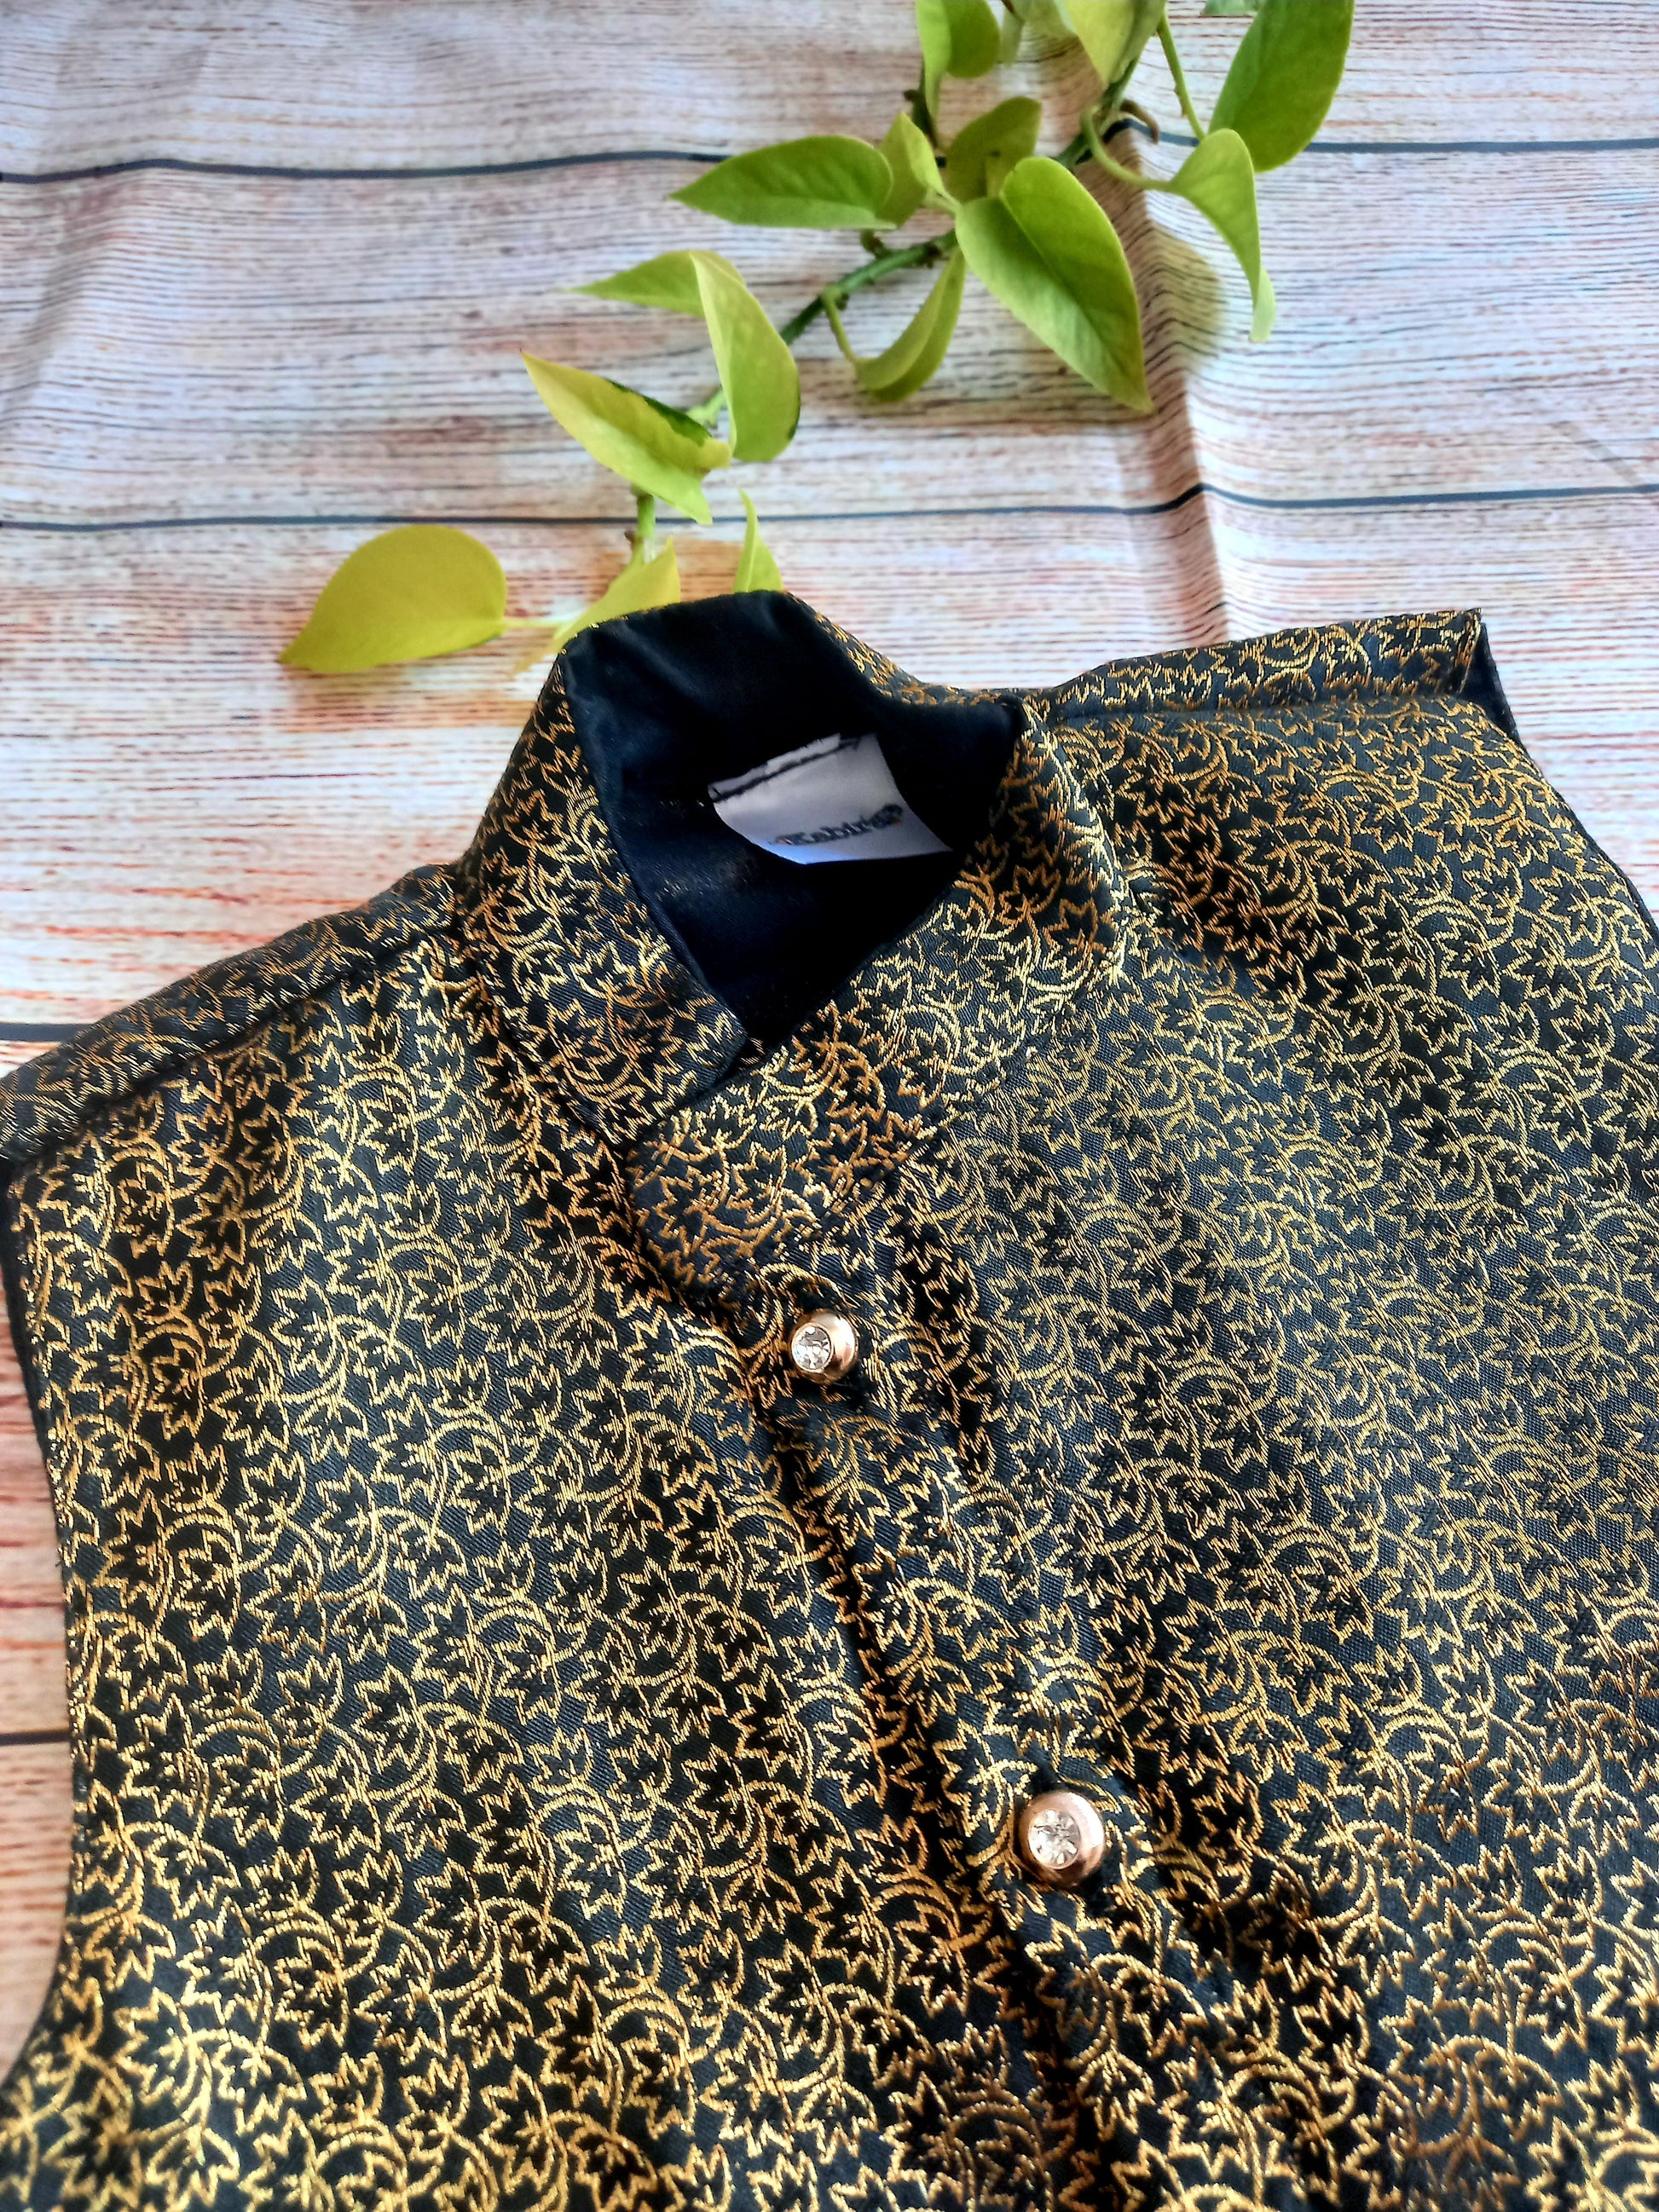 Black brocade stand collar Jacket.Cotton lining from inside avoid sweating but give warmth.Statement embellished buttons add royal charm to these jackets. Team these with any plain colored kurta or satin shirt for best festive look!